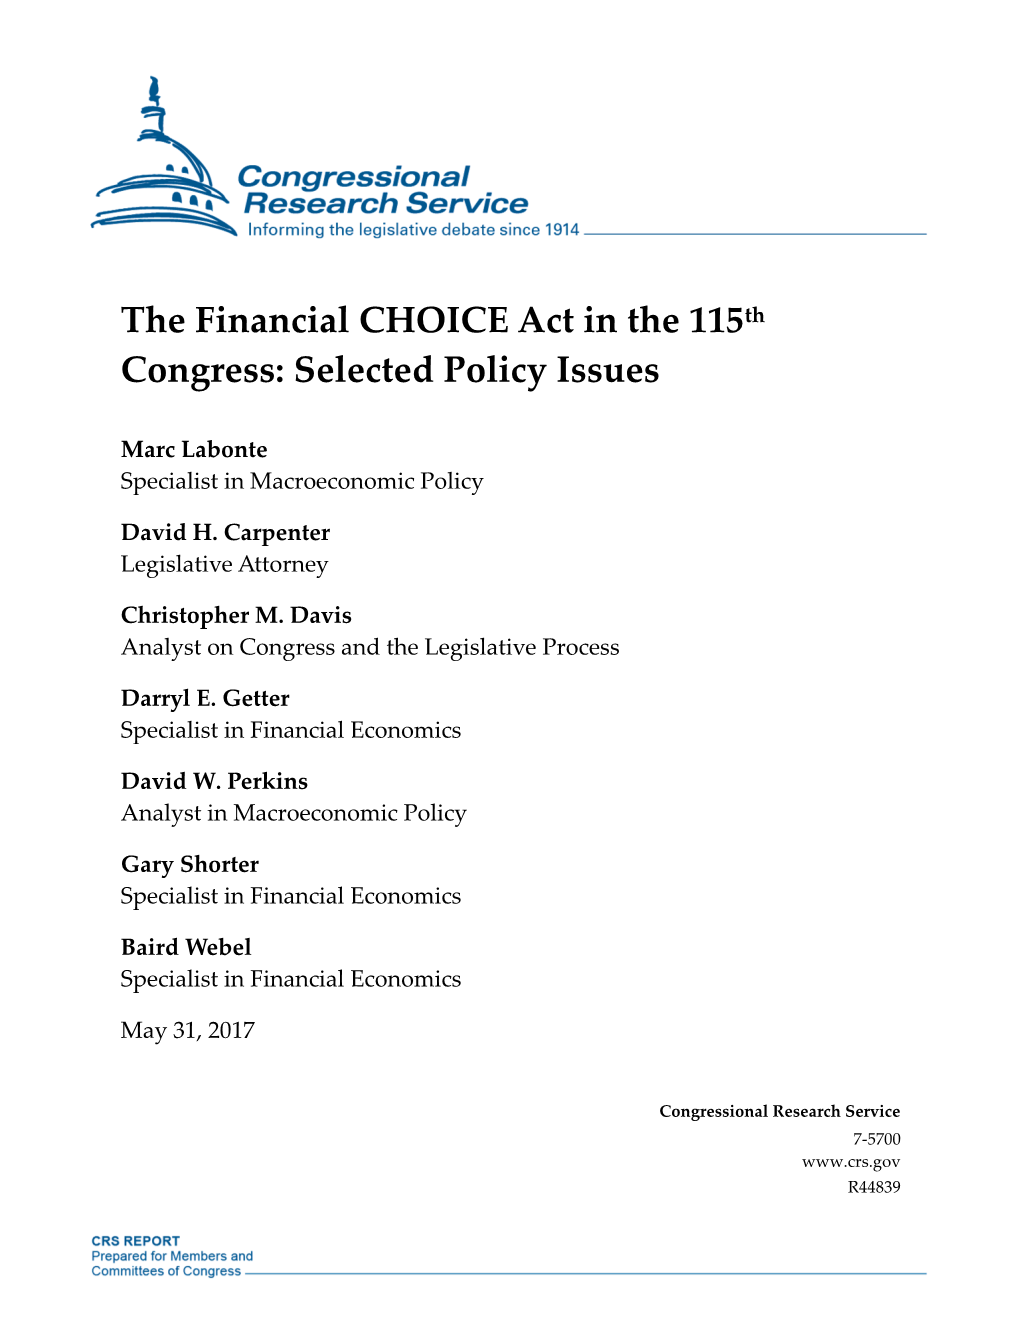 The Financial CHOICE Act in the 115Th Congress: Selected Policy Issues